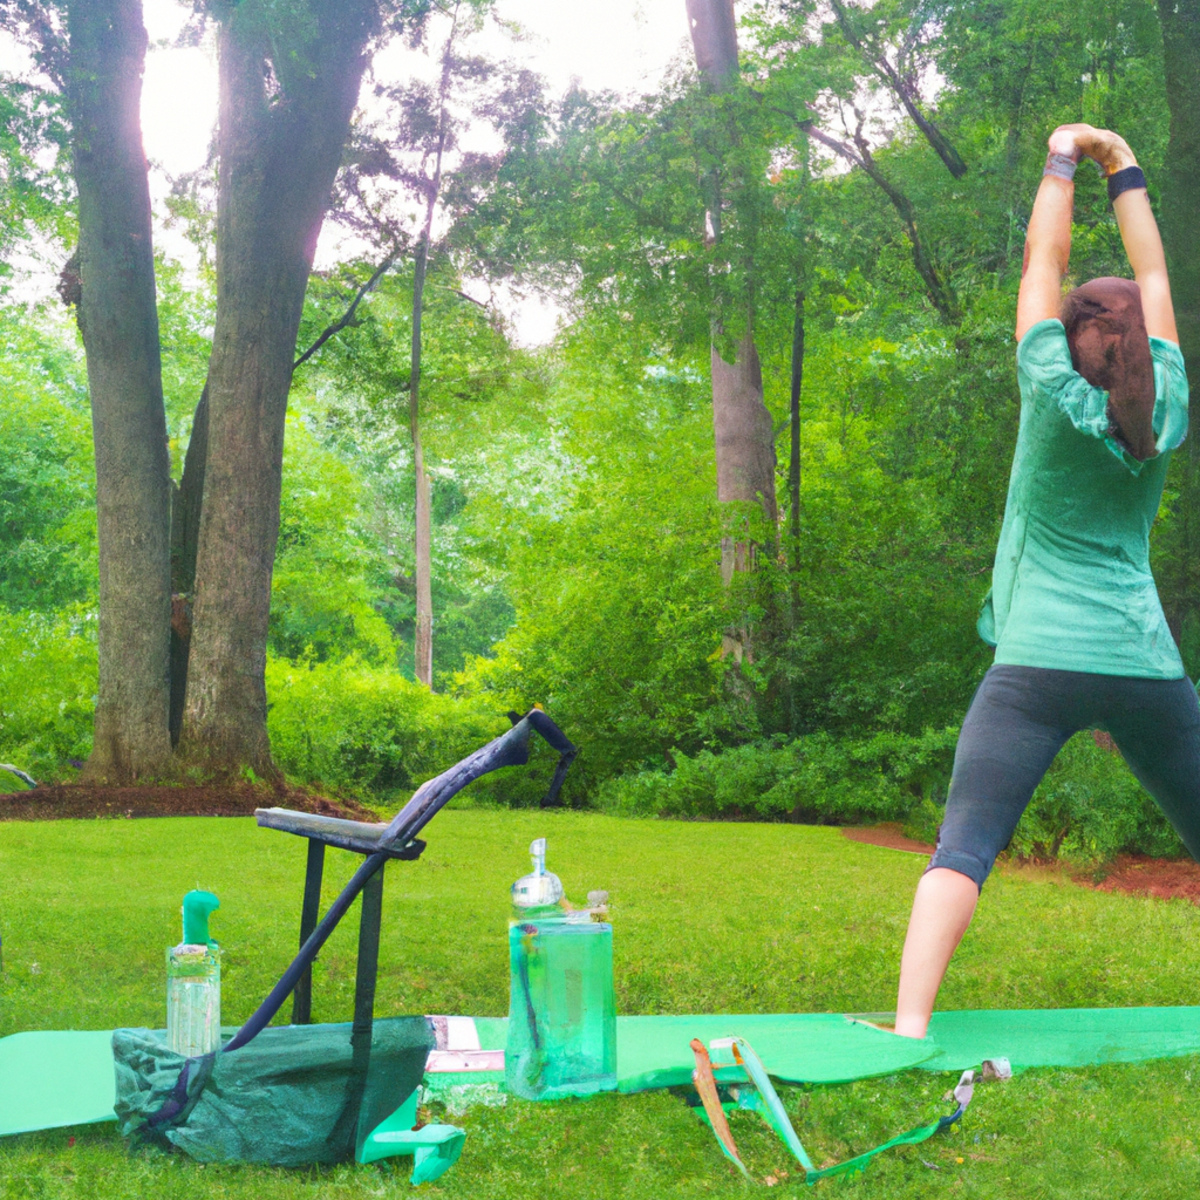 The photo captures a serene outdoor setting with a lush green backdrop. In the foreground, there are various objects scattered around, including a yoga mat, a water bottle, and a resistance band. The focus of the image is on a person performing a bodyweight exercise, with their arms extended overhead and their legs in a lunge position. The person is dressed in workout clothes and appears to be fully engaged in the exercise. The natural lighting and vibrant colors of the surroundings create a sense of energy and vitality, inspiring readers to get outside and get fit.